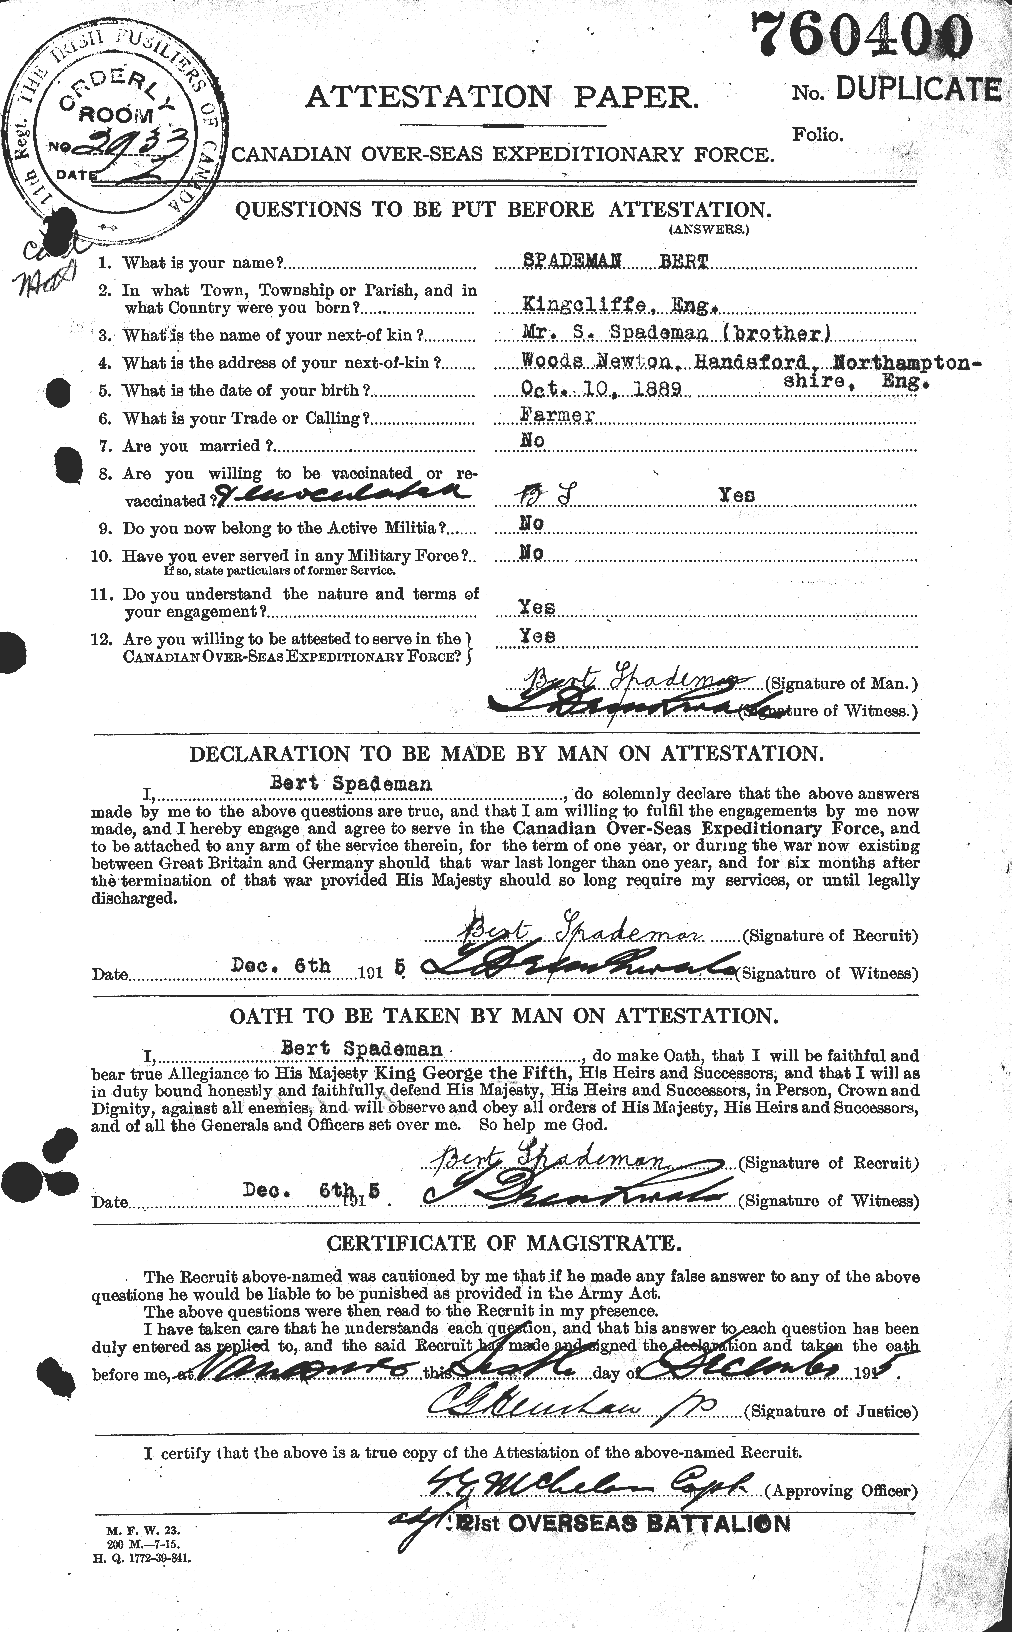 Personnel Records of the First World War - CEF 618280a